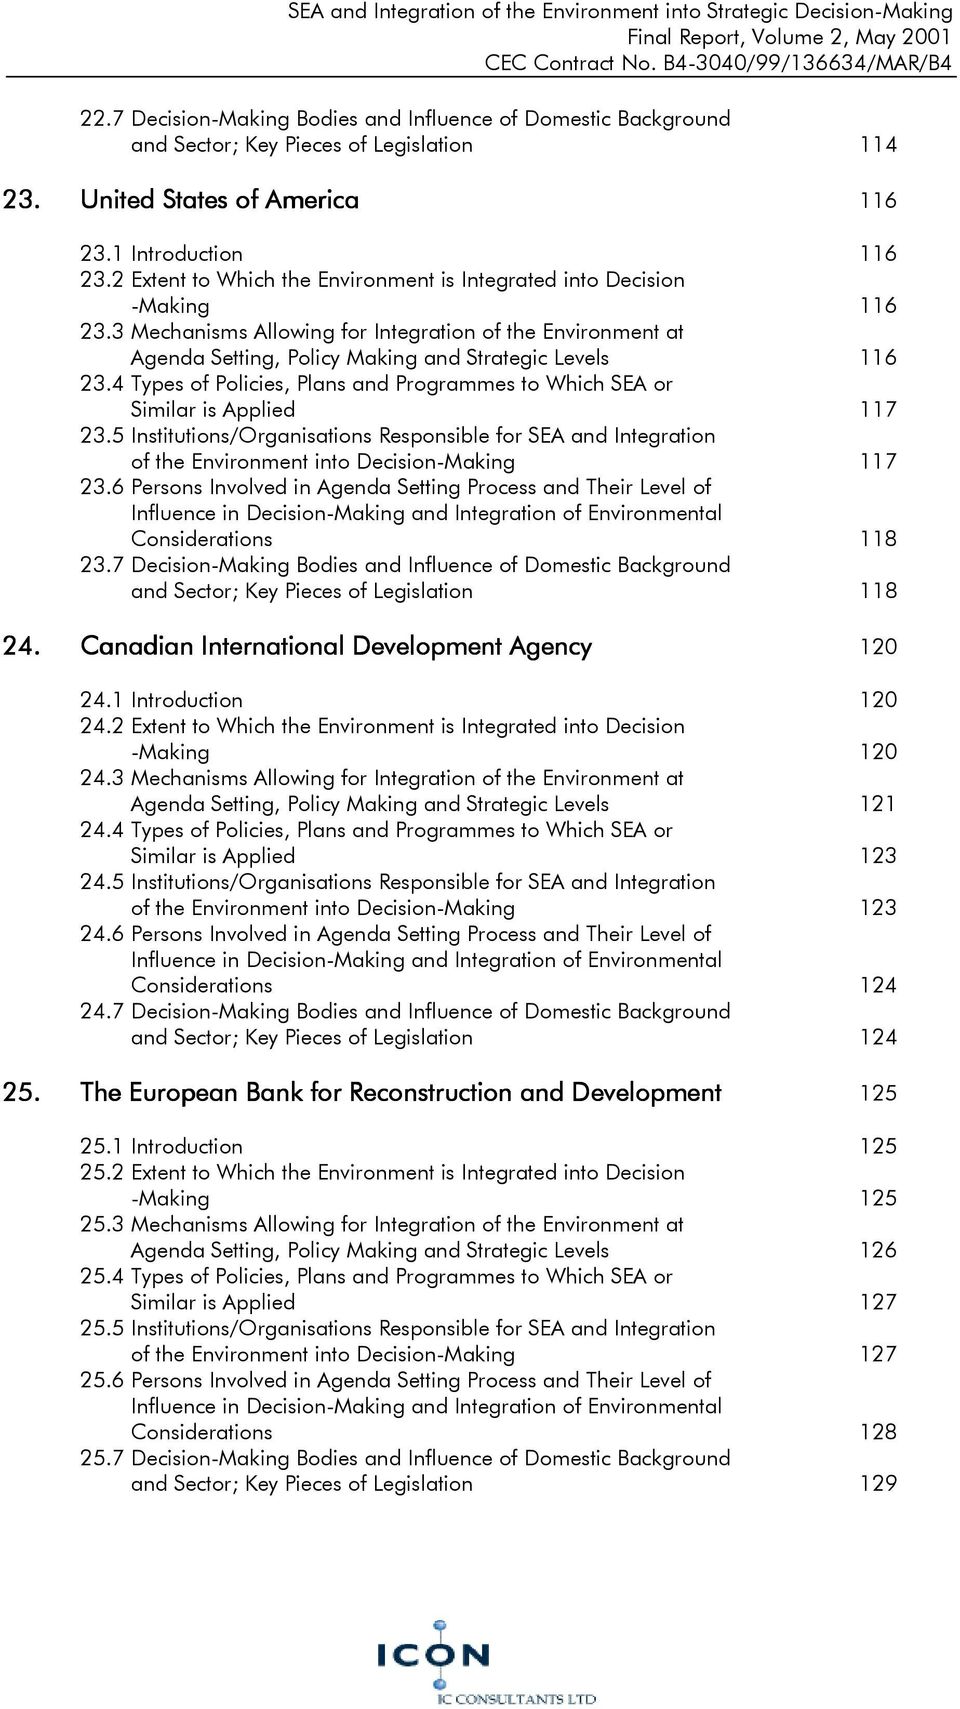 4 Types of Policies, Plans and Programmes to Which SEA or Similar is Applied 117 23.5 Institutions/Organisations Responsible for SEA and Integration of the Environment into Decision-Making 117 23.